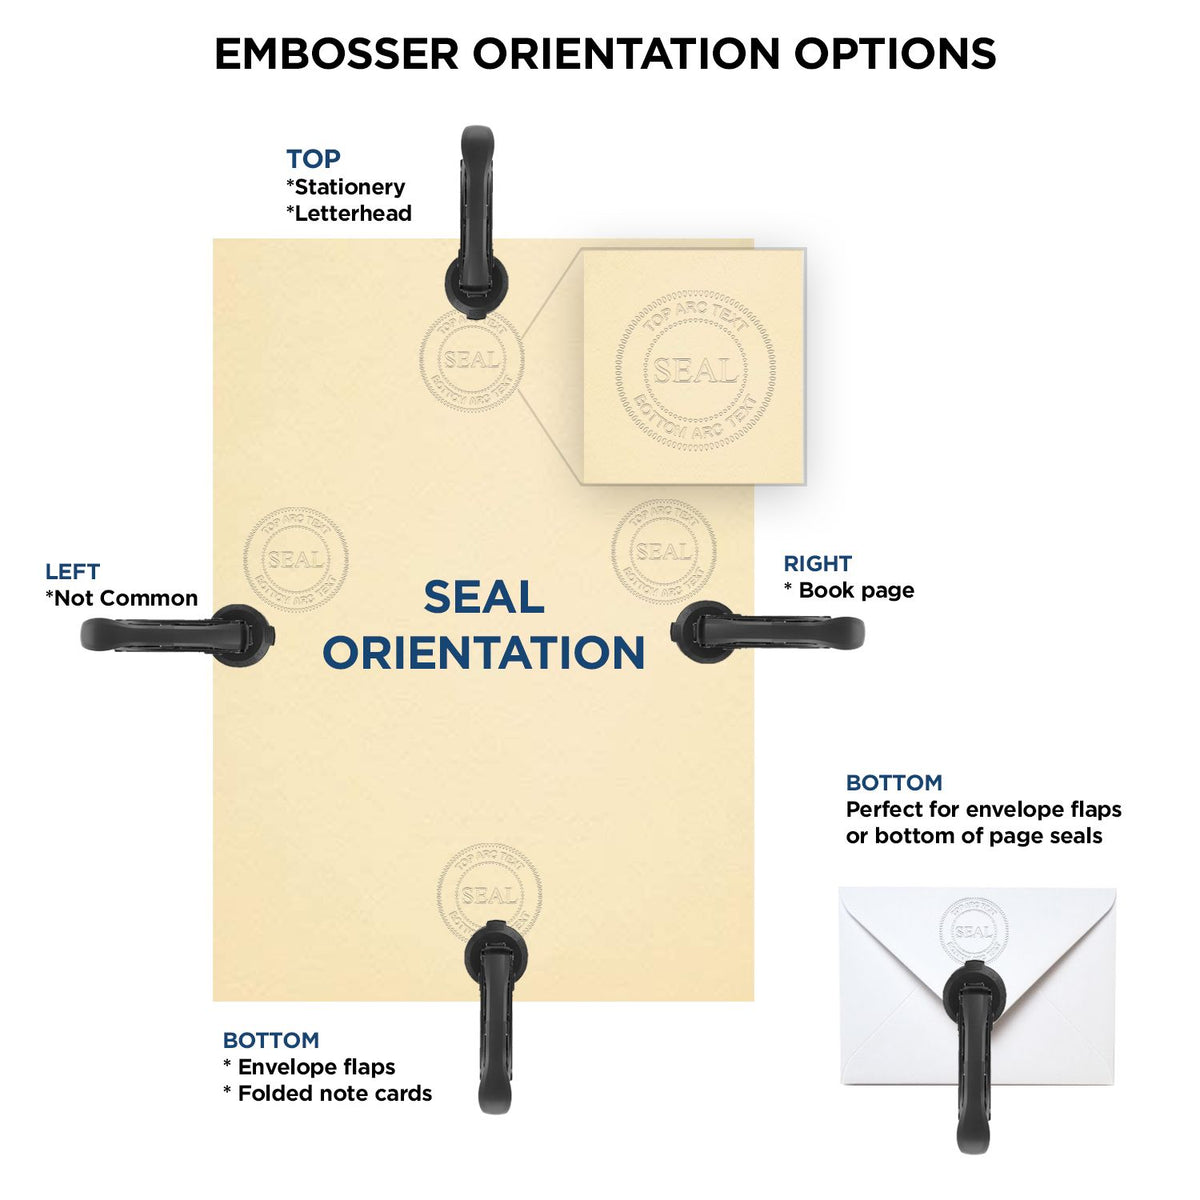 An infographic for the Long Reach Nebraska Land Surveyor Seal showing embosser orientation, this is showing examples of a top, bottom, right and left insert.